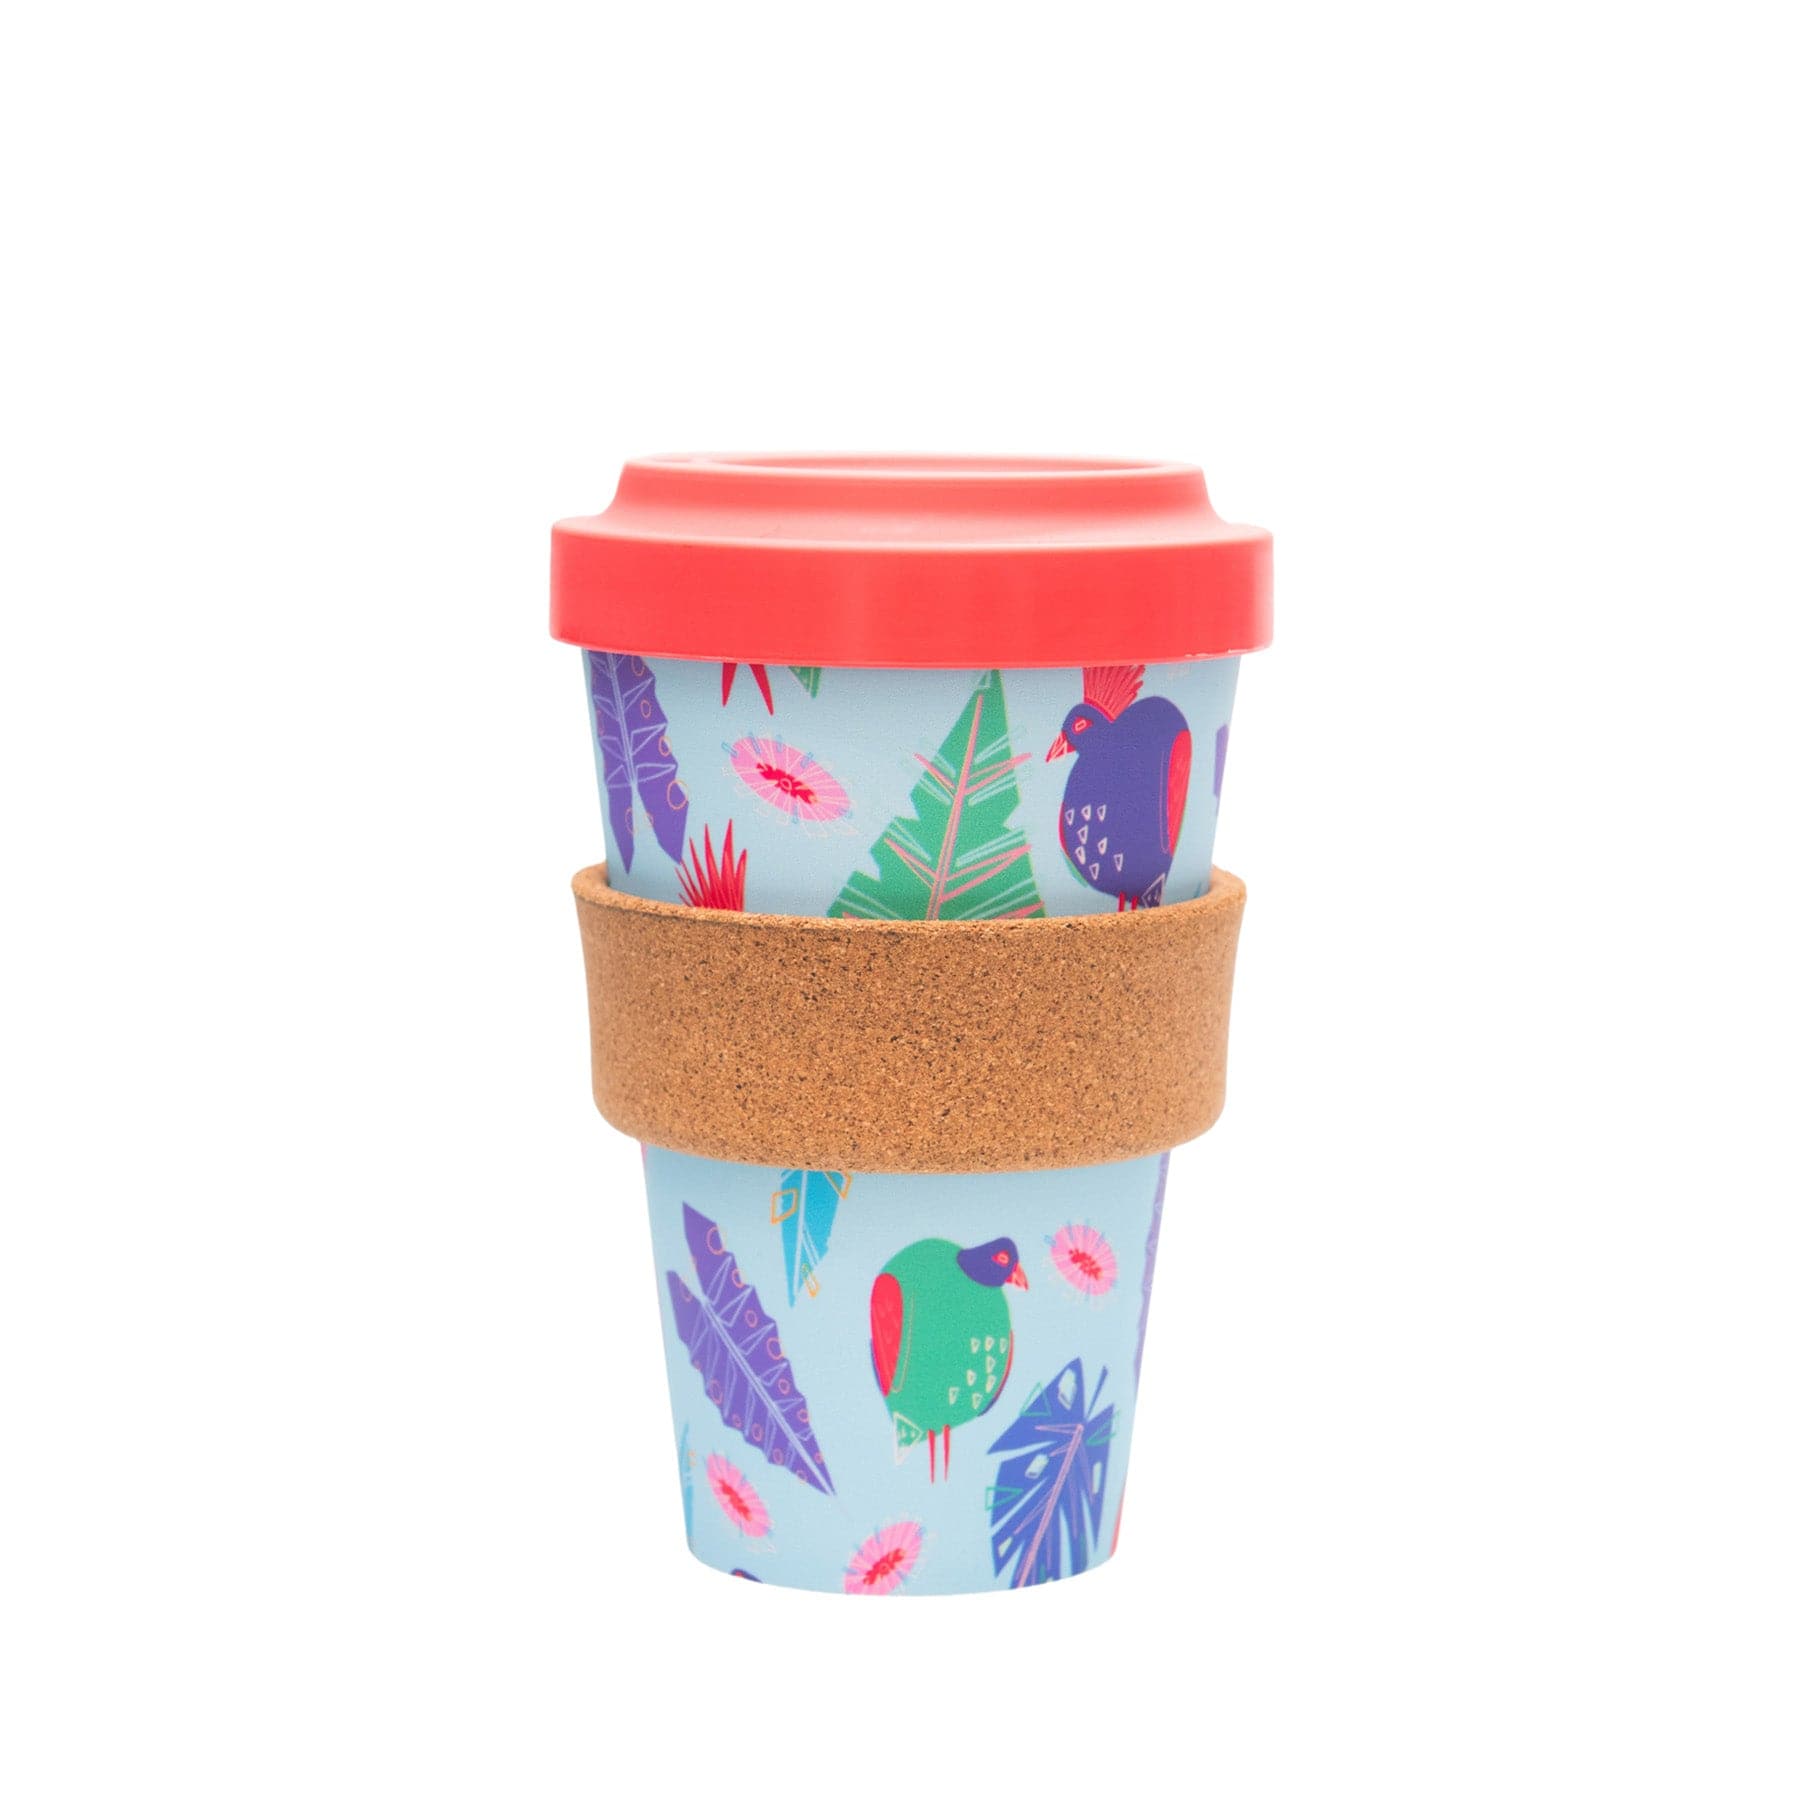 Reusable coffee cup with tropical bird design, red silicone lid, and cork sleeve on a white background